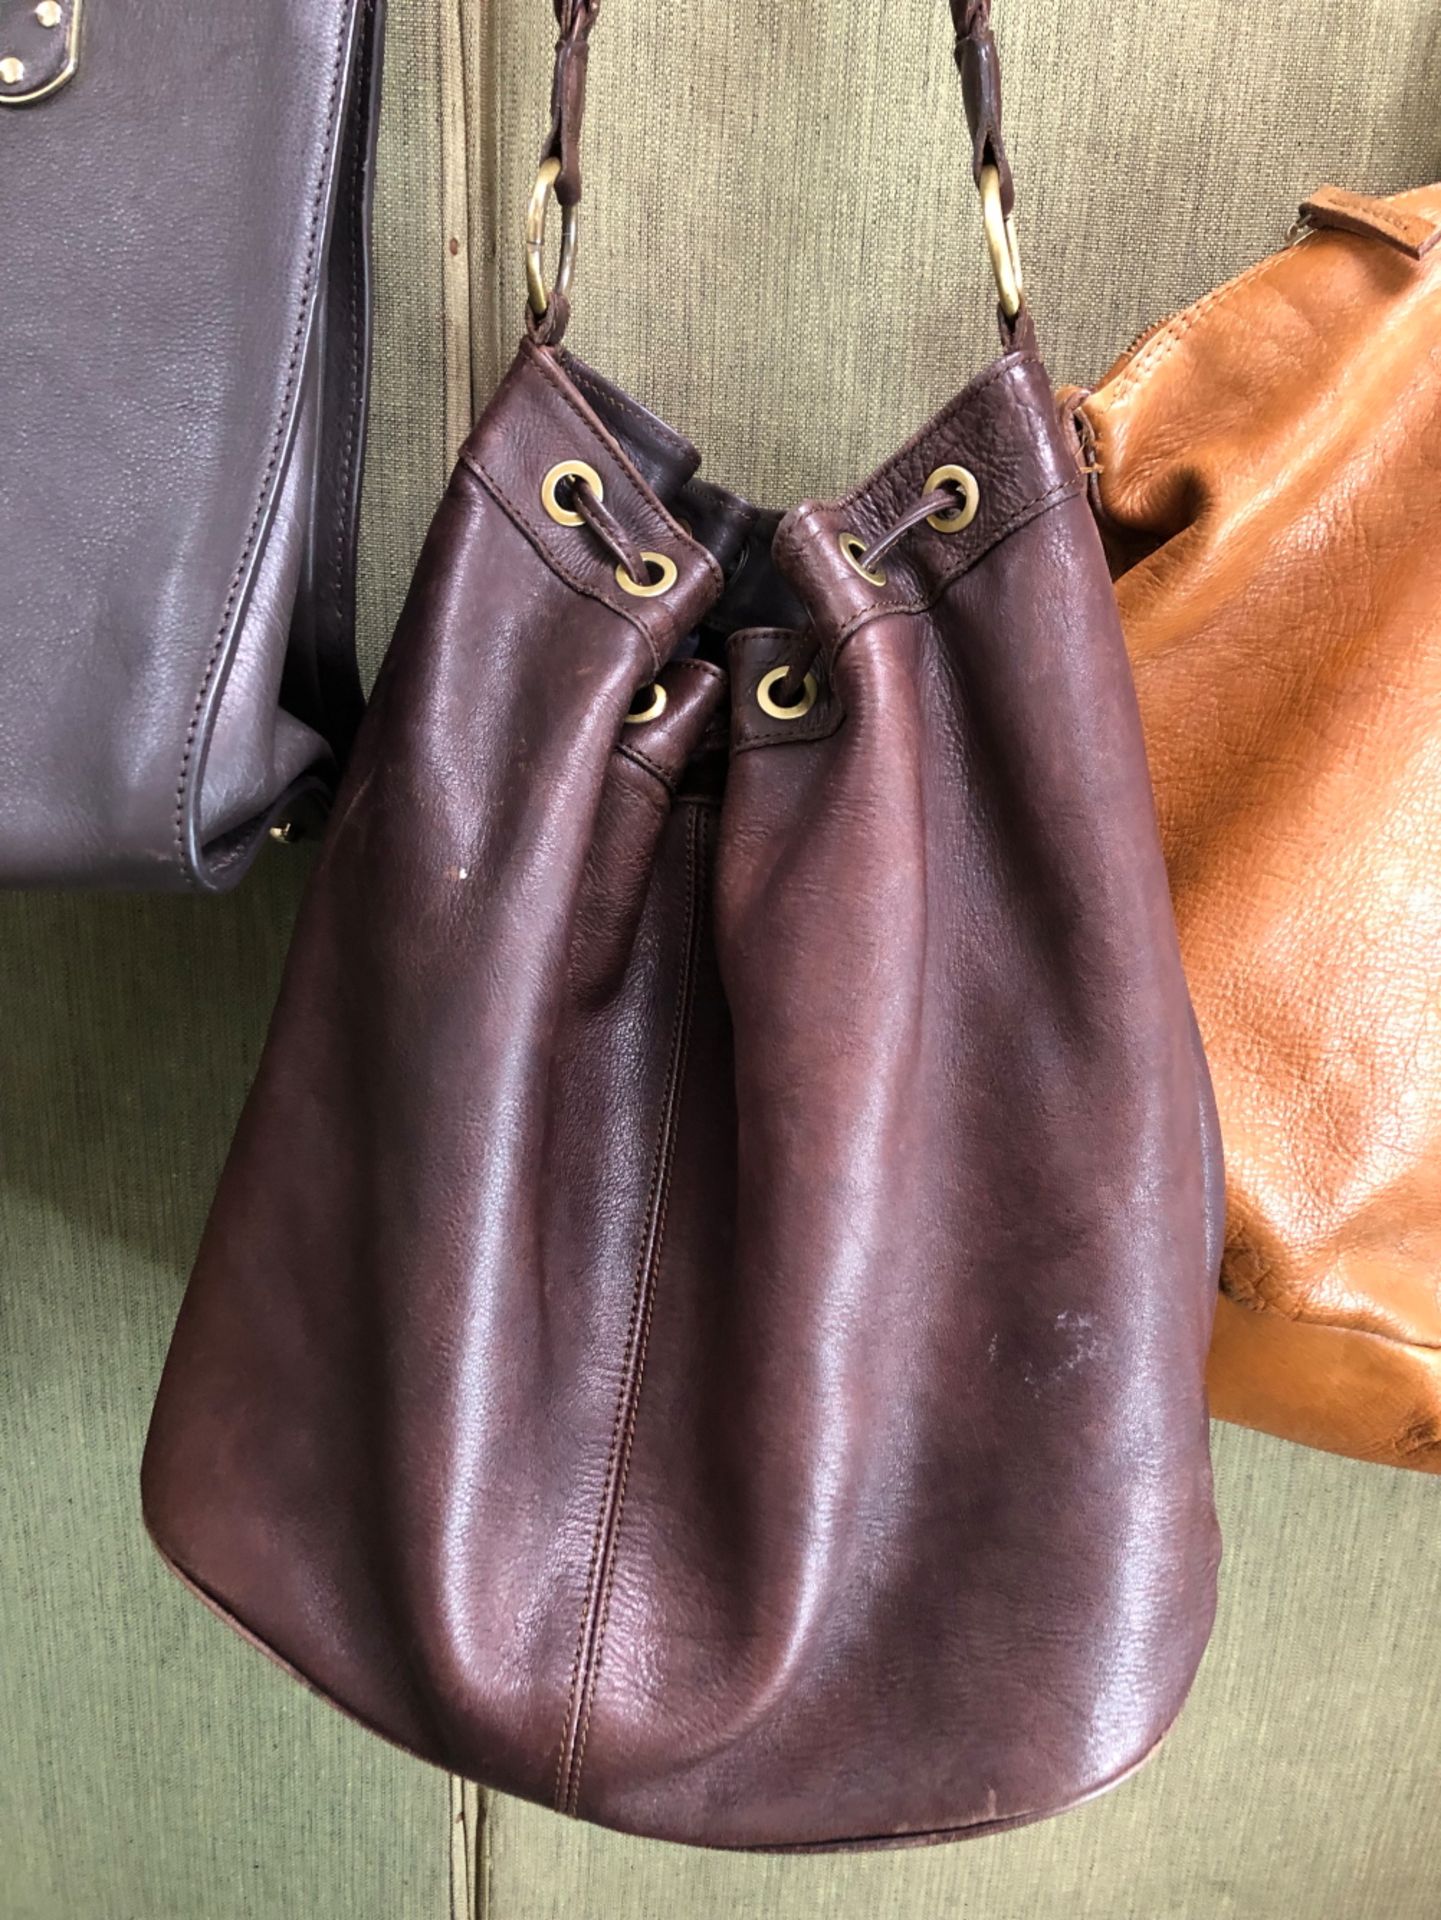 A ZARA WOMAN LARGE BROWN HANDBAG W 45cm, TOGETHER WITH A DARK BROWN LEATHER PAUL COSTELLOE BAG, A - Image 10 of 11